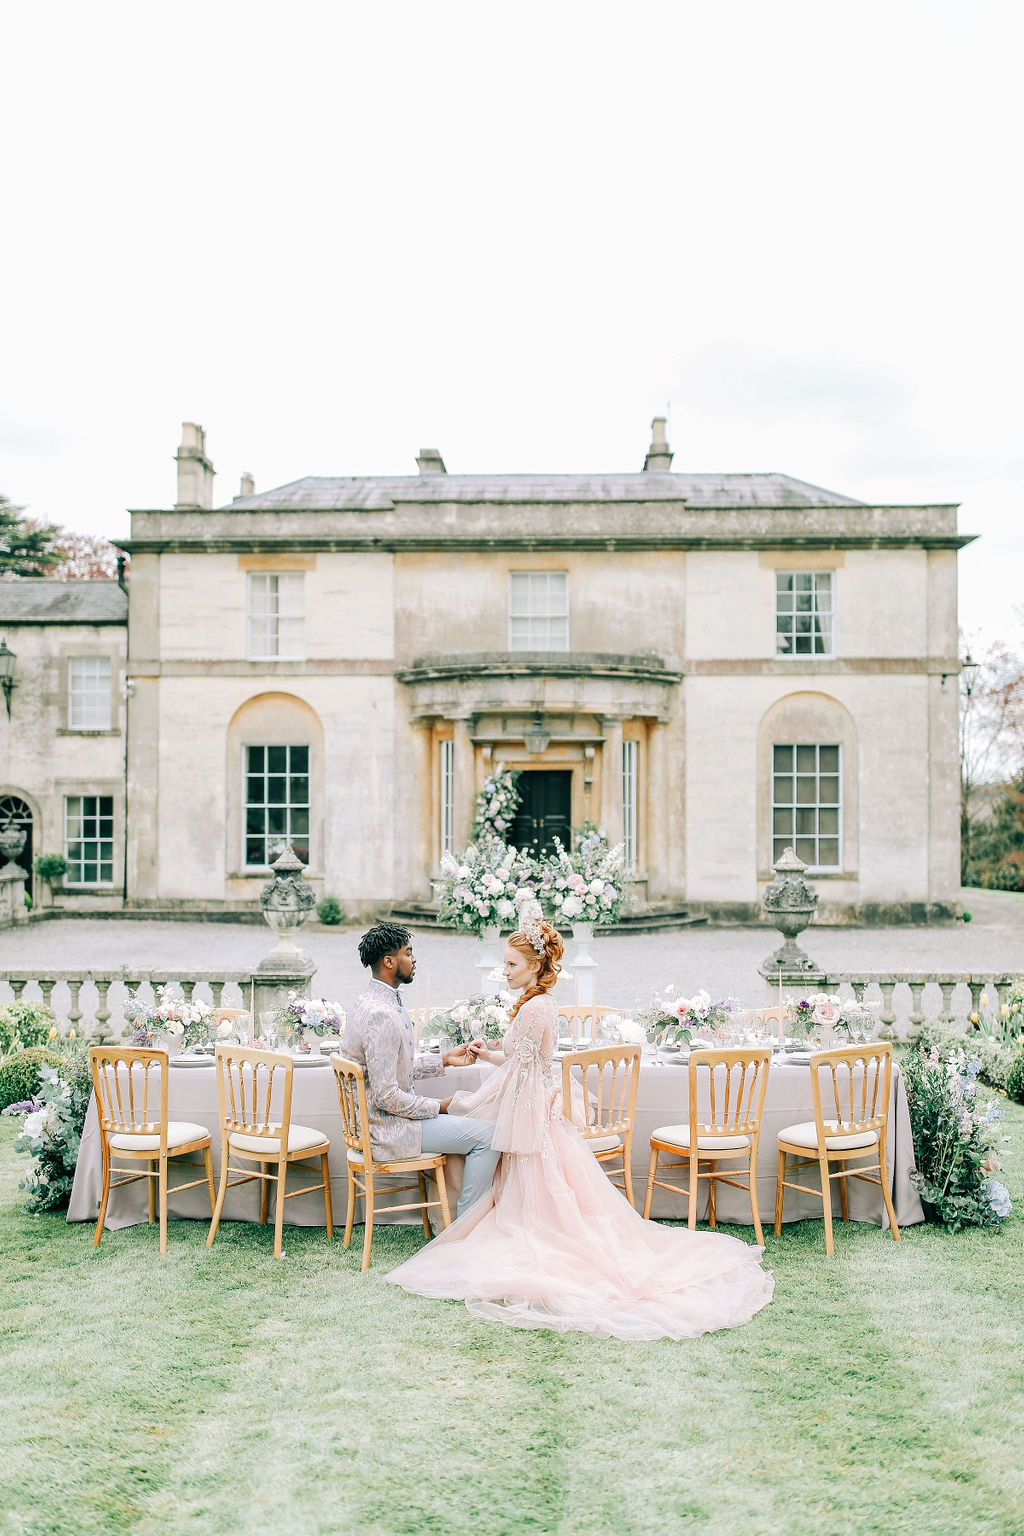 Parishs House Bath wedding florist Flourish and Grace with Charlotte Wise Photography somerset manor house country wedding venue, bridgerton inspired wedding with pastel flowers